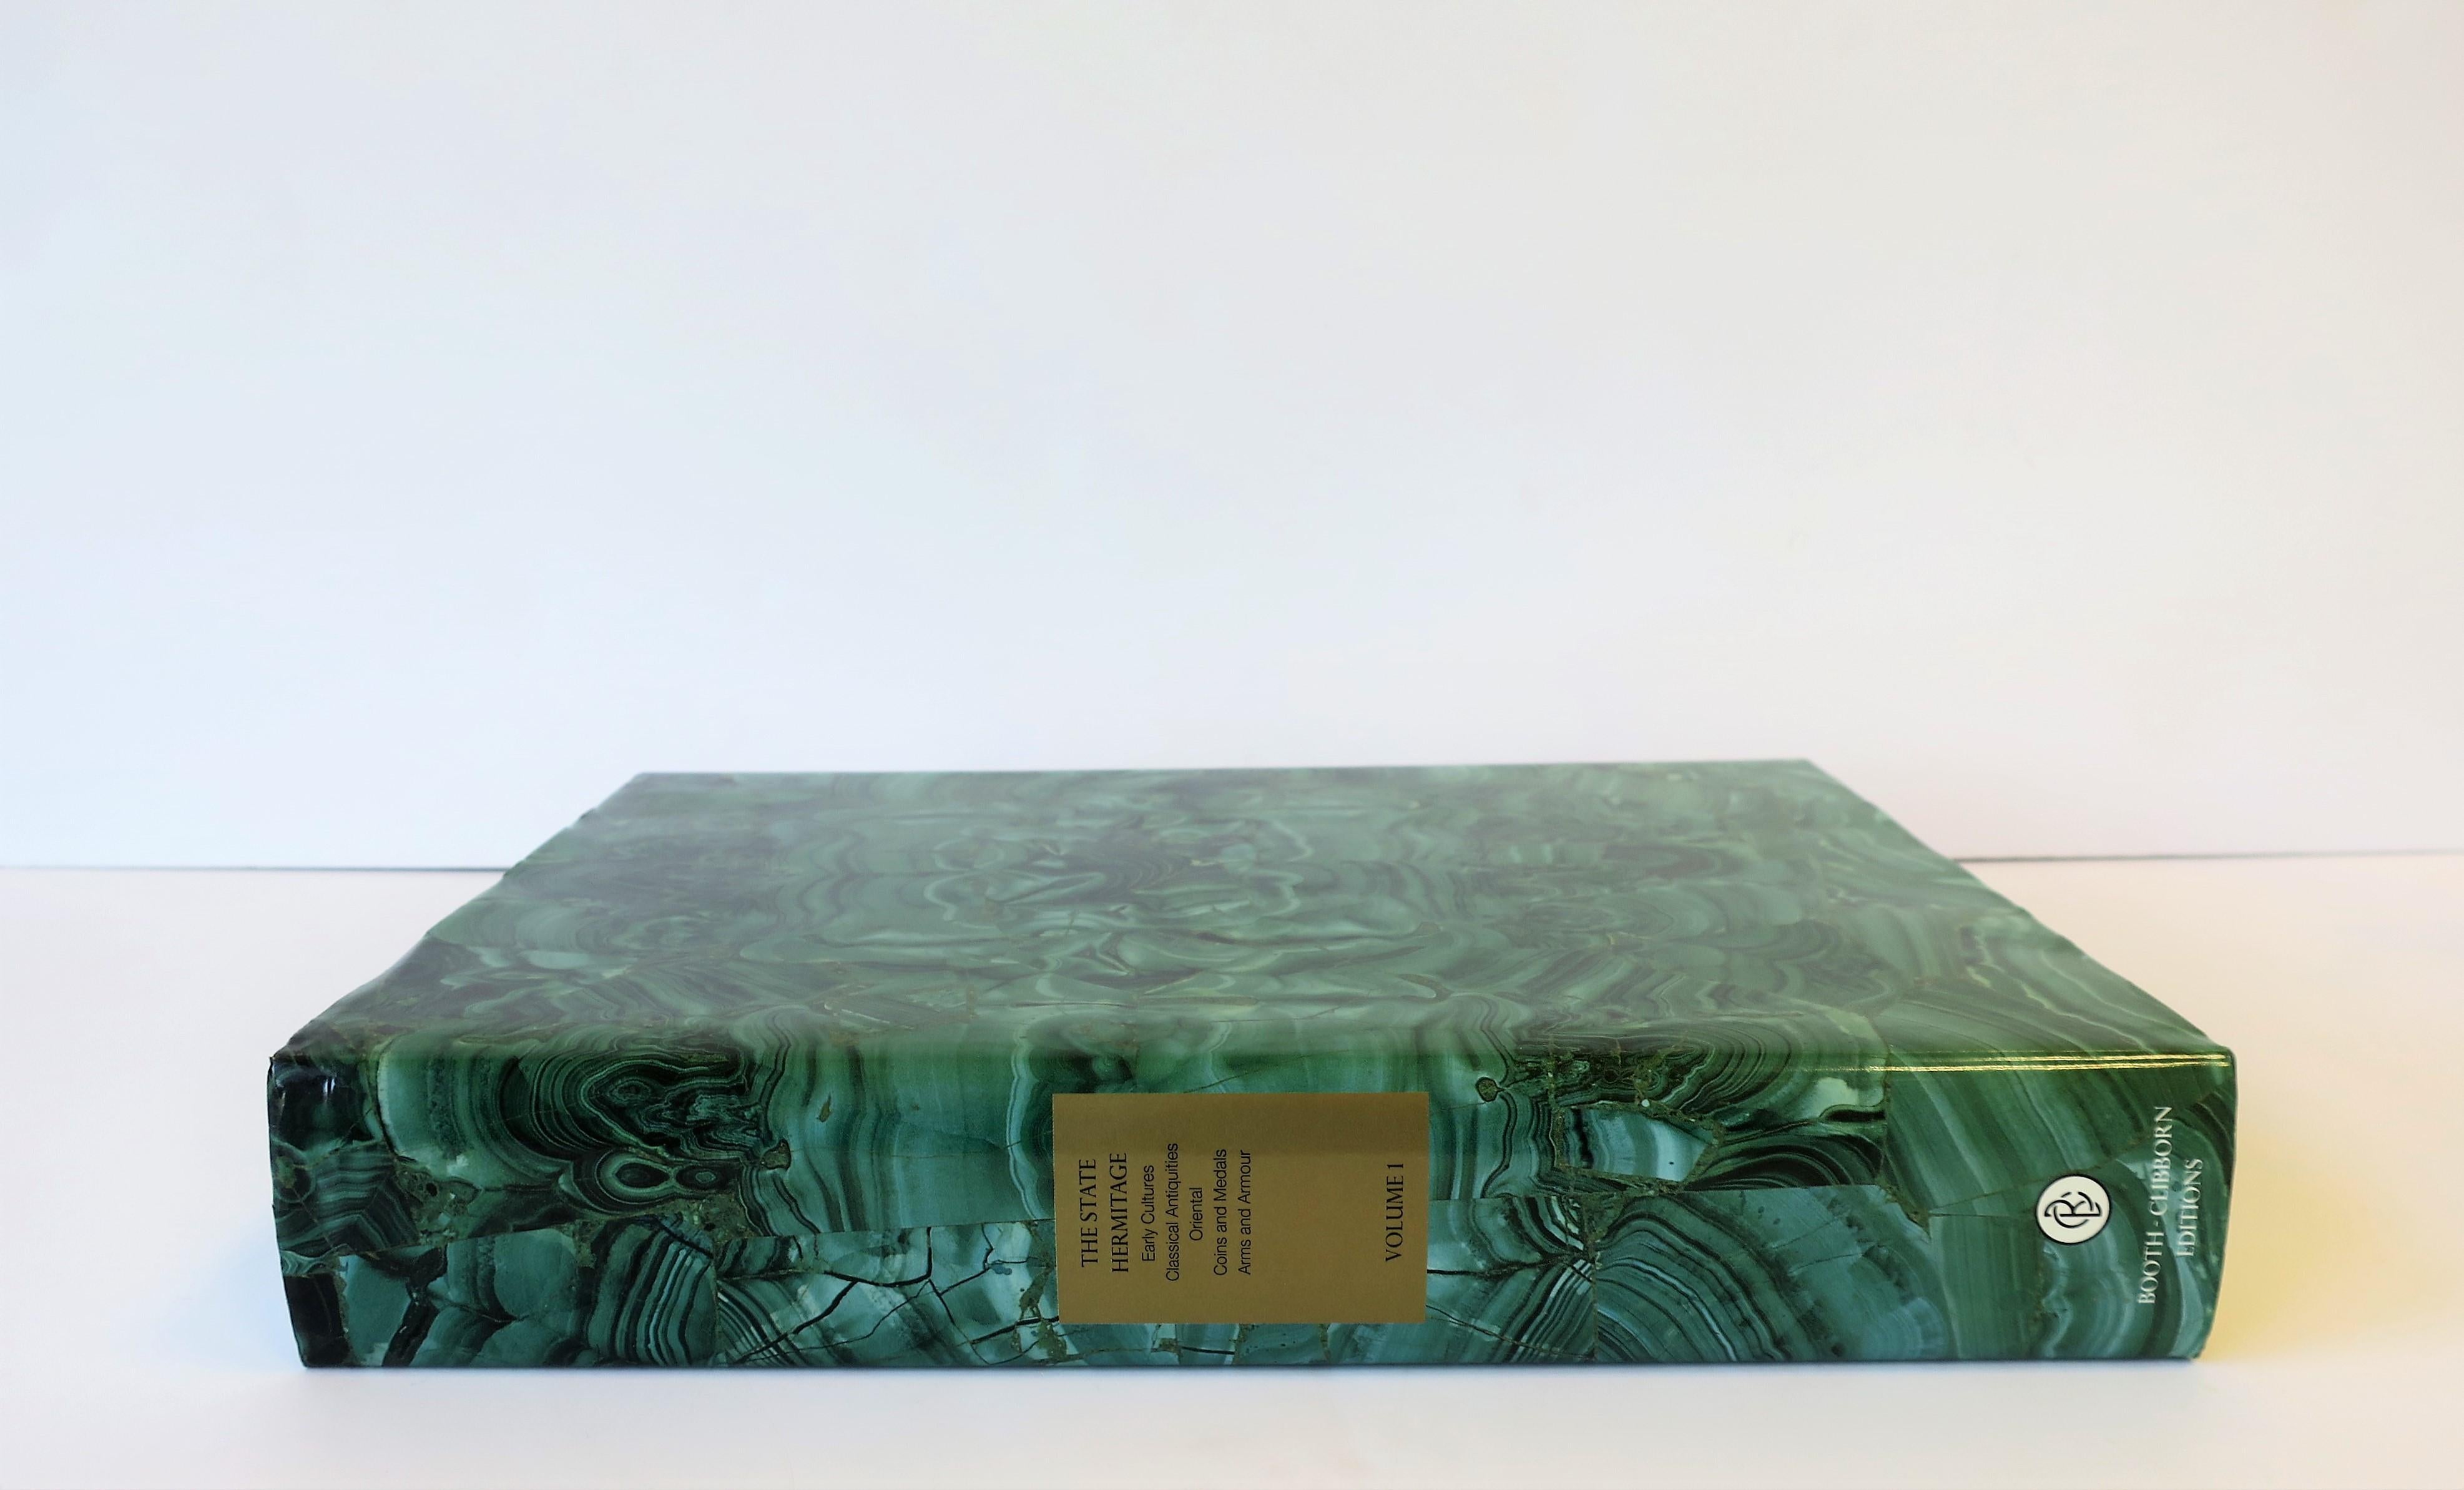 20th Century Hermitage Museum Coffee Table or Library Books with Malachite Green Dust Jackets